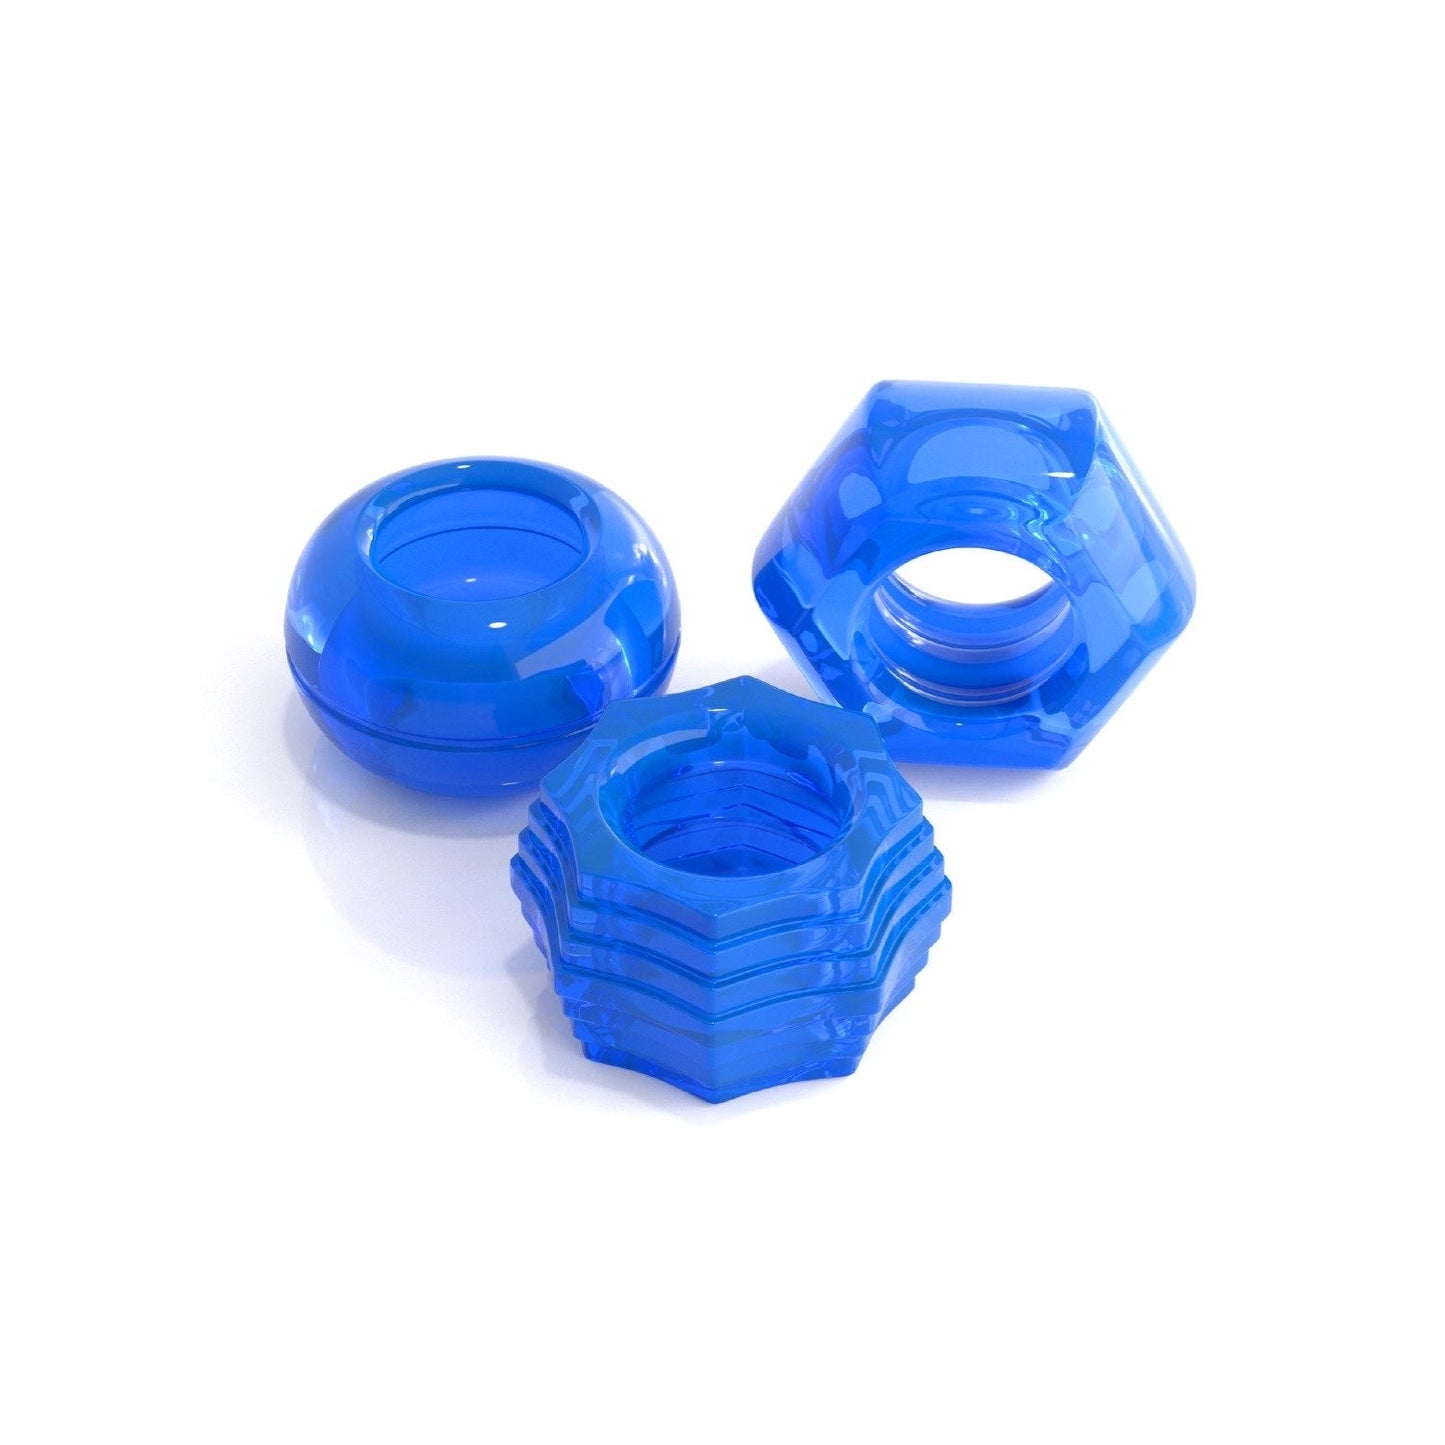 Deluxe Cock Ring Set - Blue Cock Rings - Set of 2